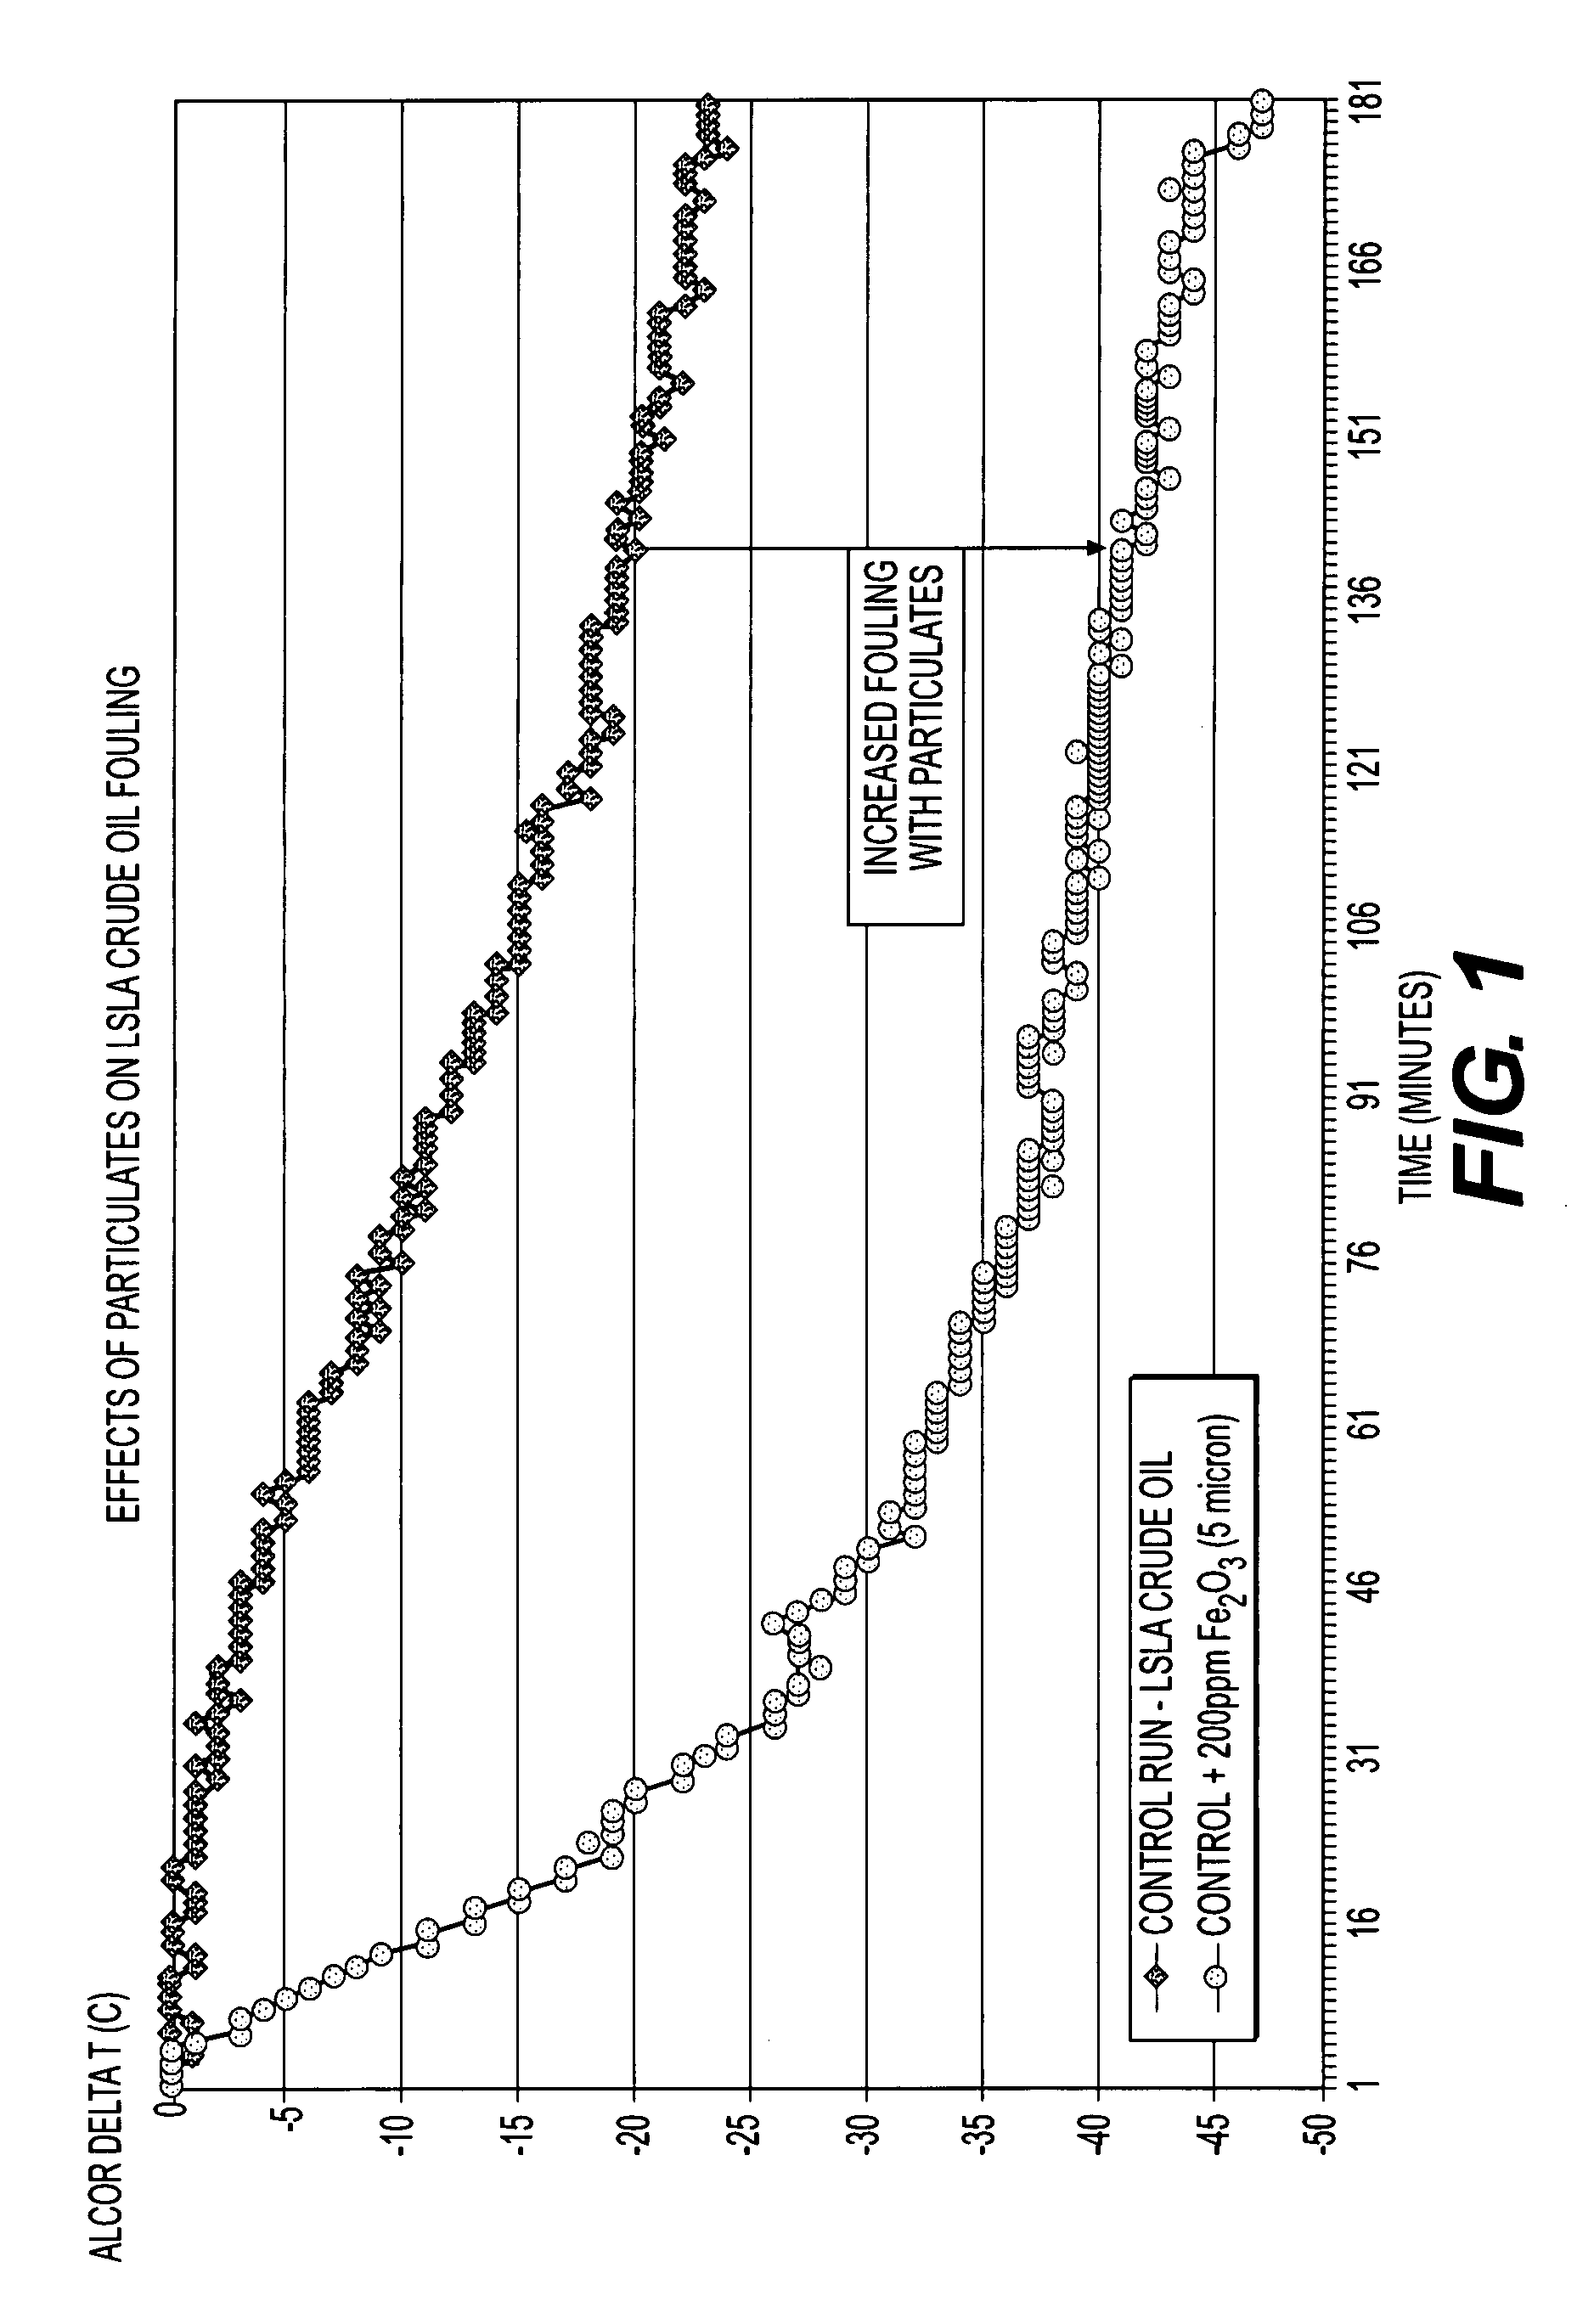 Method of blending high tan and high SBN crude oils and method of reducing particulate induced whole crude oil fouling and asphaltene induced whole crude oil fouling